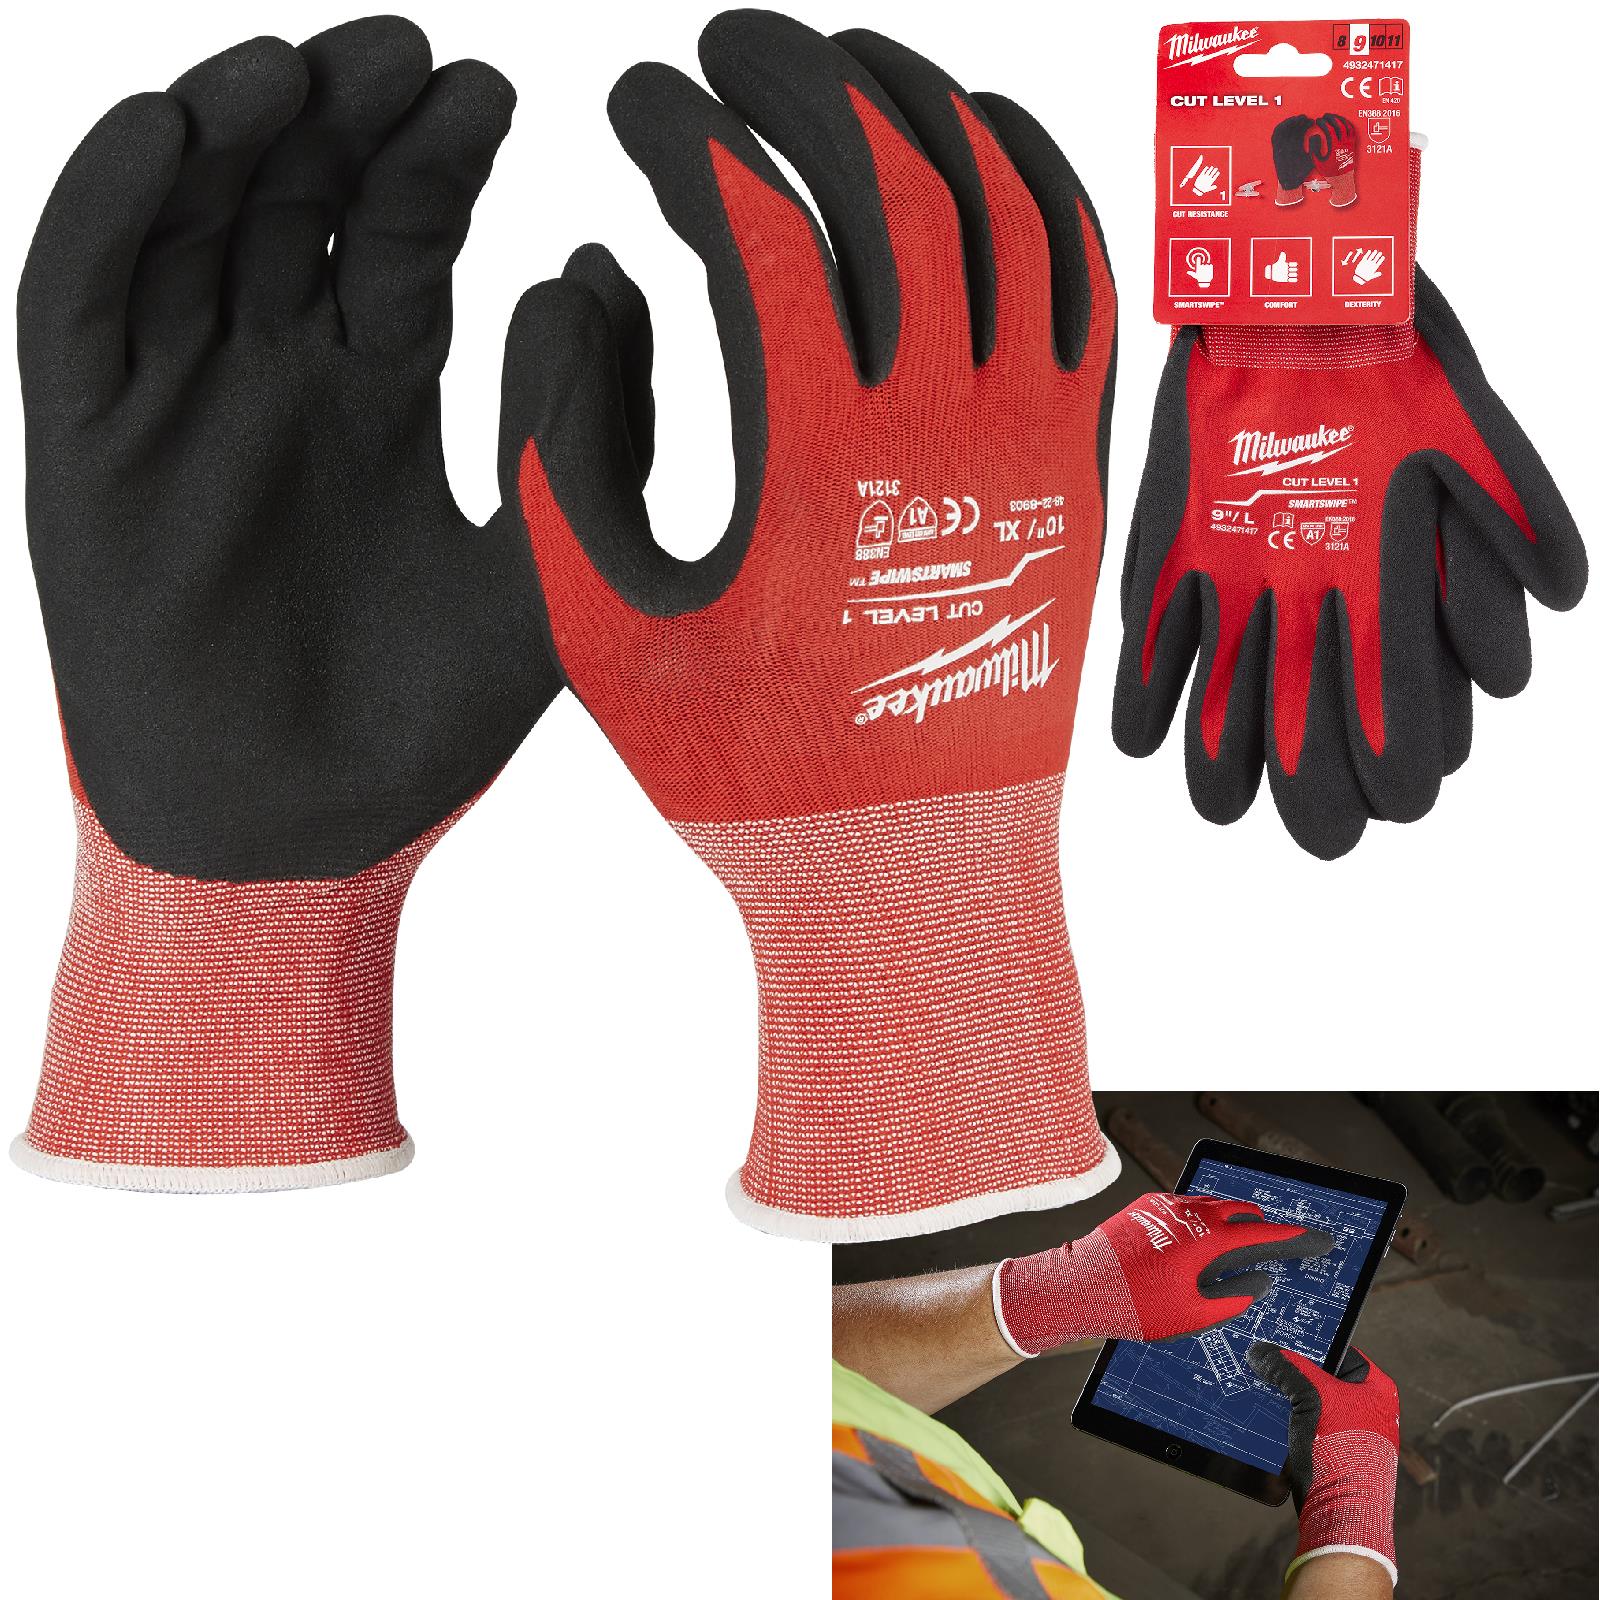 Milwaukee Safety Gloves Cut Level 1/A Dipped Glove Size 10 / XL Extra Large